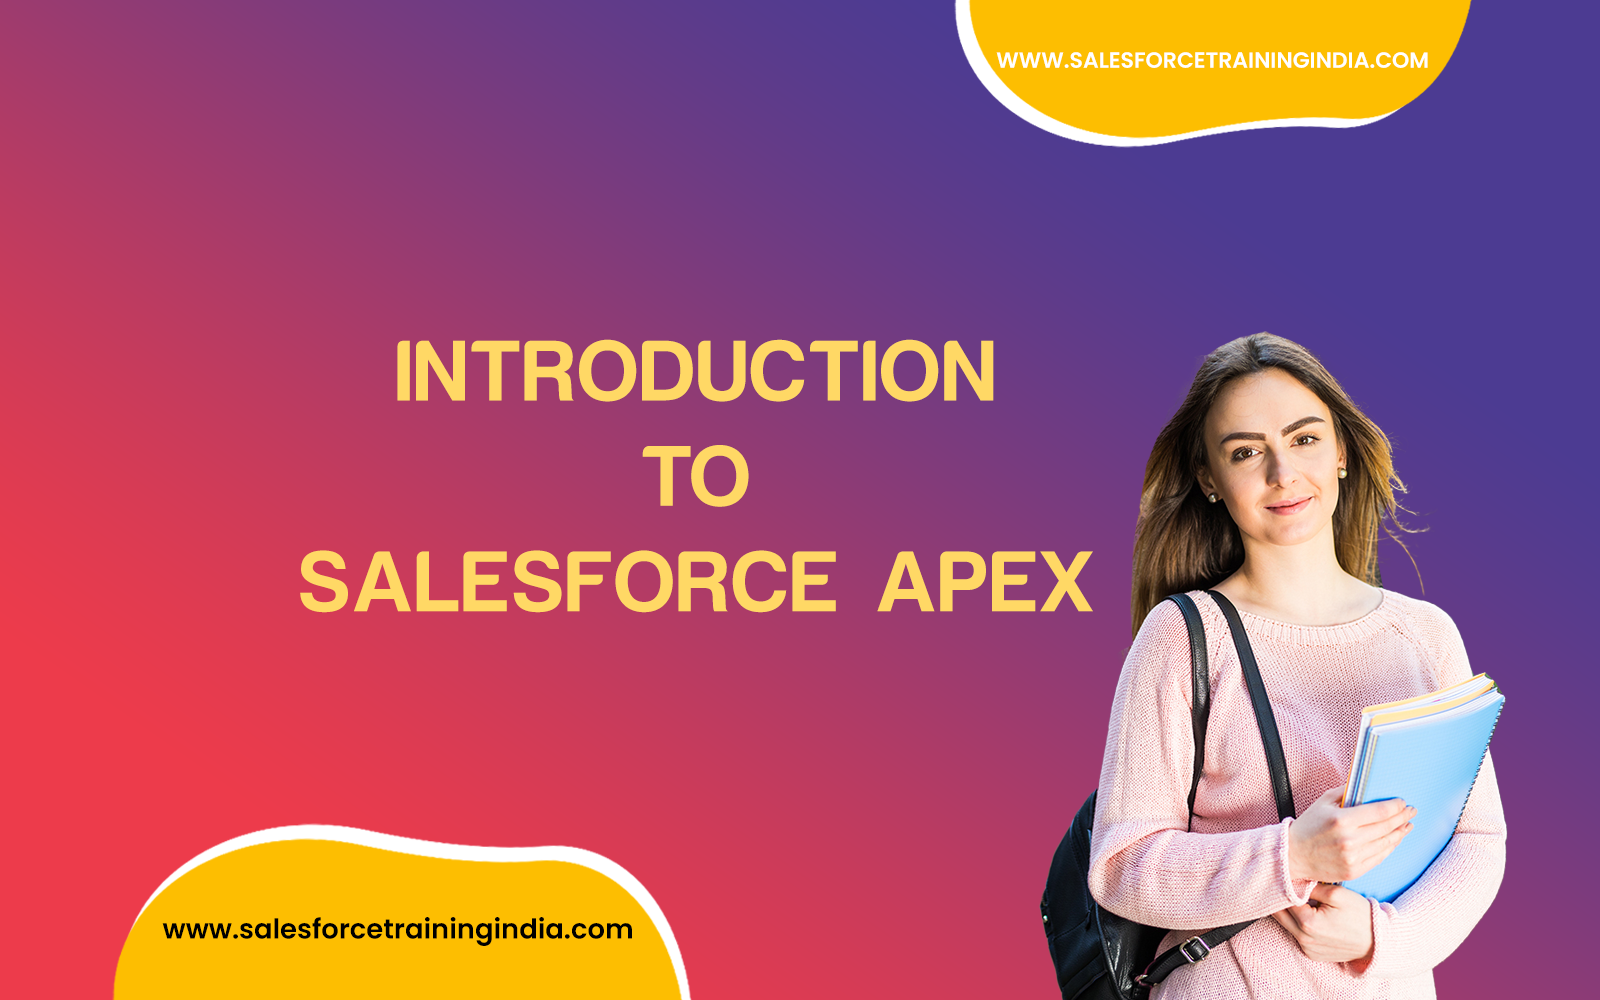 Introduction to Salesforce Apex